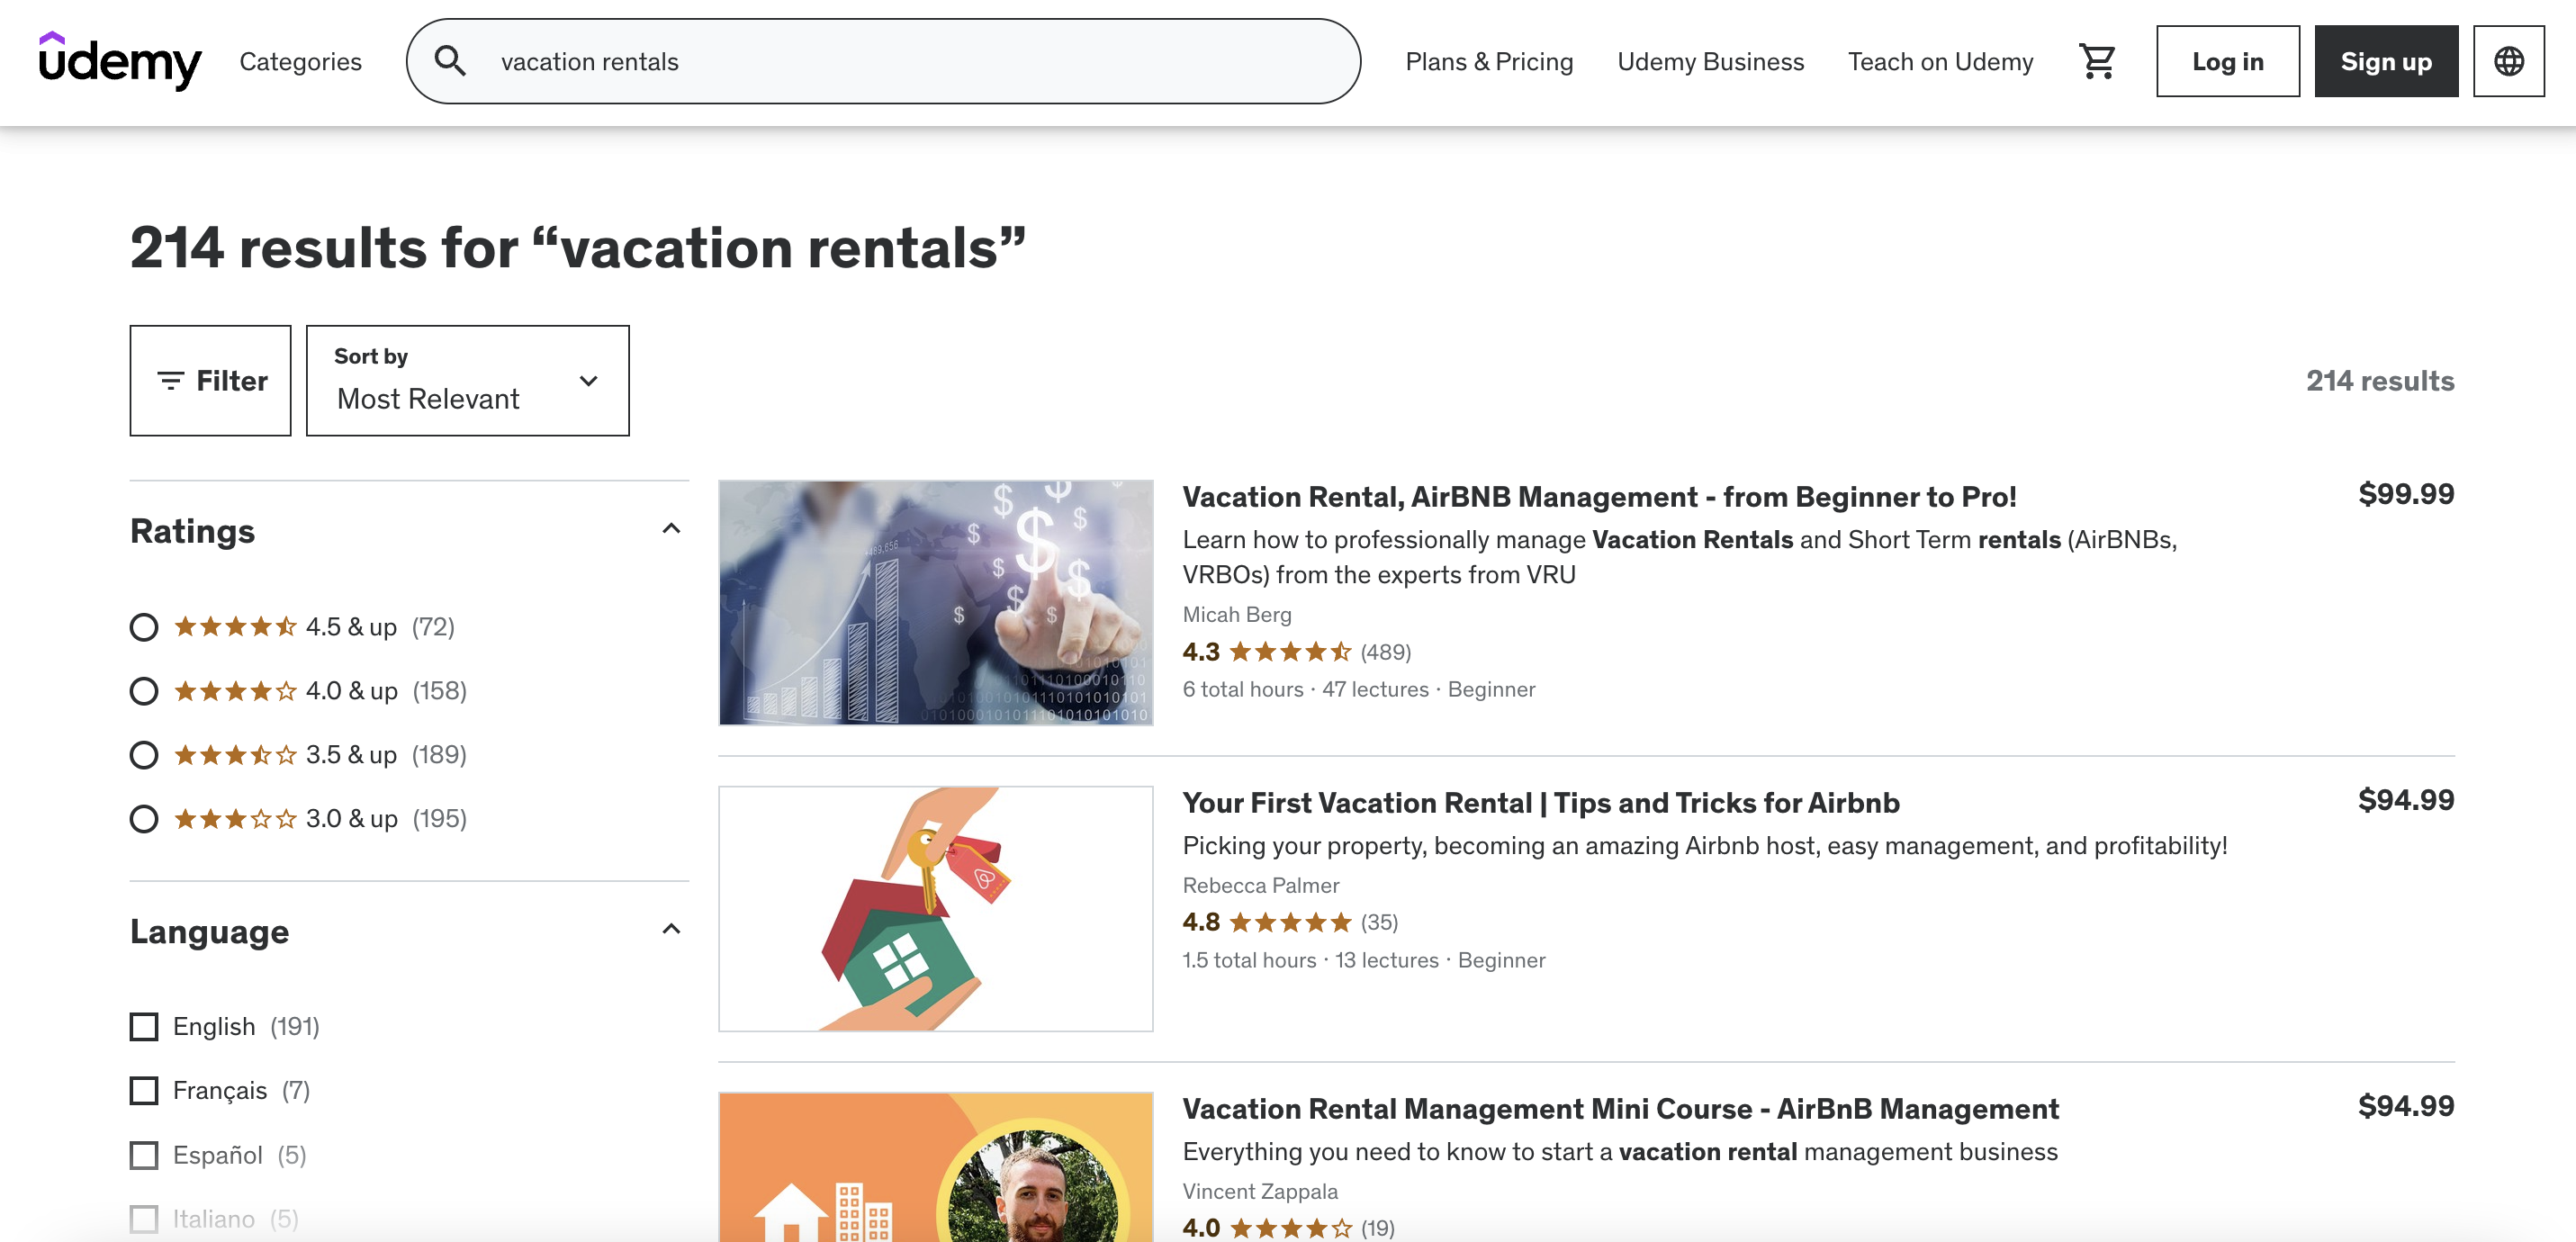 Vacation rental courses on udemy